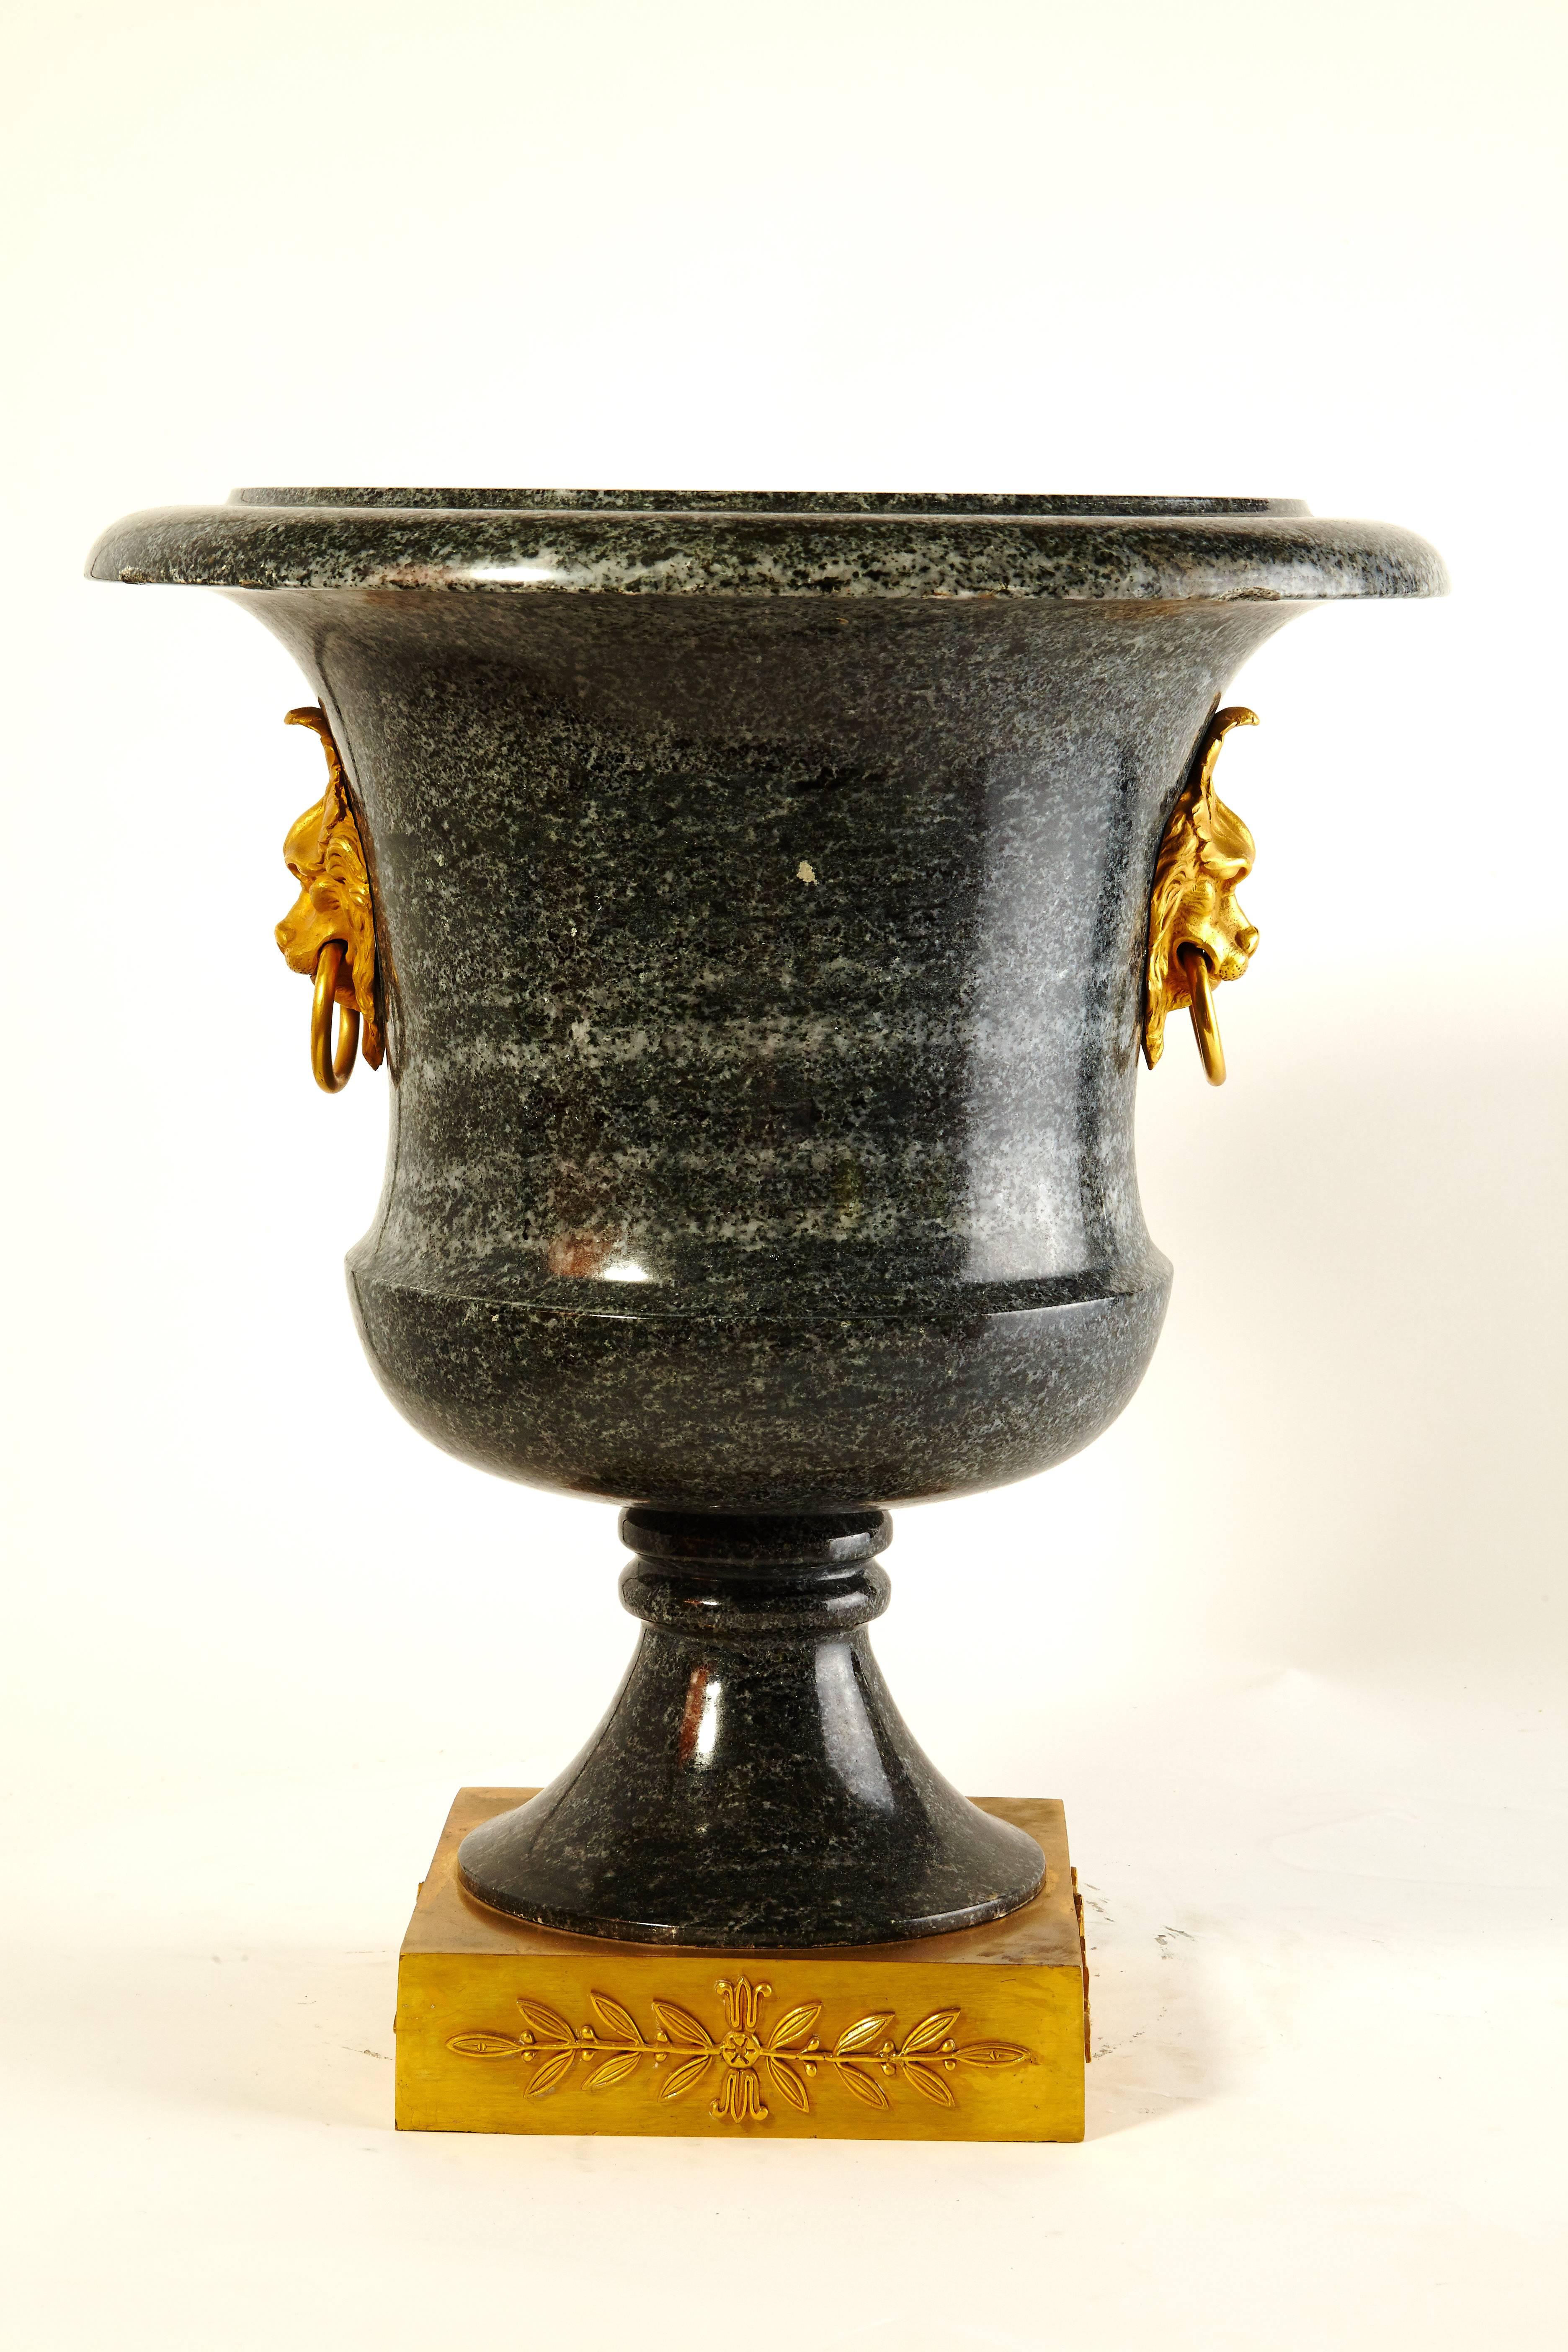 Pair of exceptional neoclassical campagna shaped green granite urns mounted with finely chased gilt bronze lions' heads and sitting on finely executed gilt bronze bases decorated in relief with a classical motif of laurel leaves and berries.